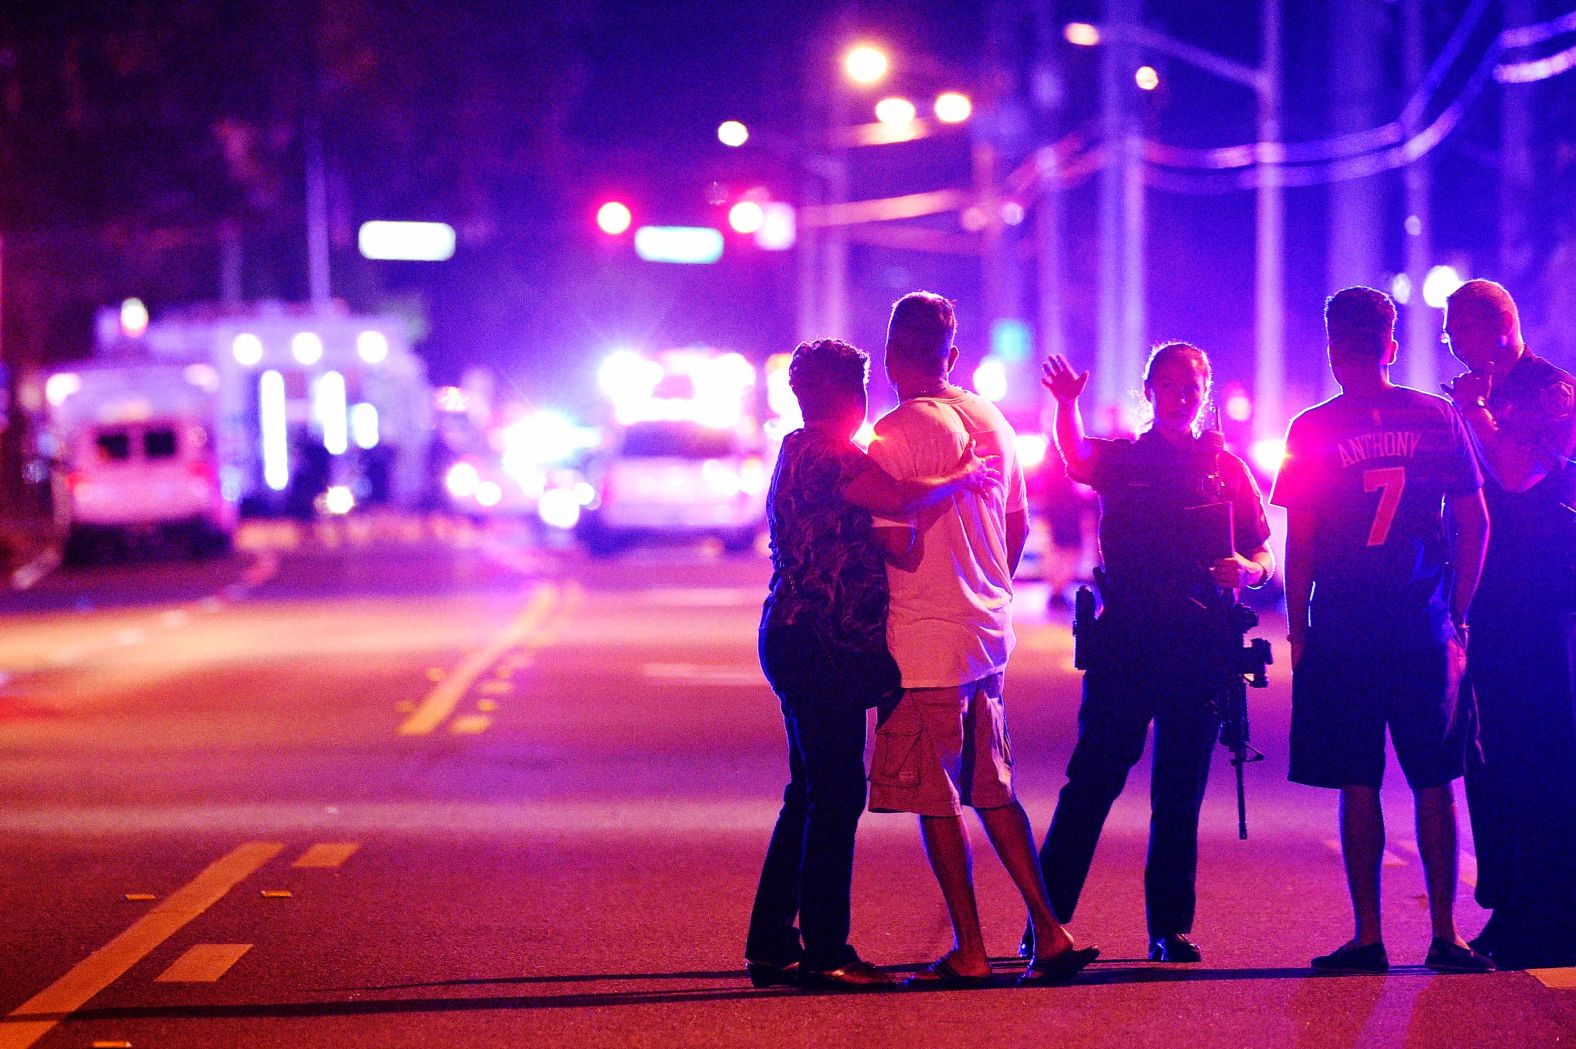 Orlando police officers direct friends and family away from the scene.